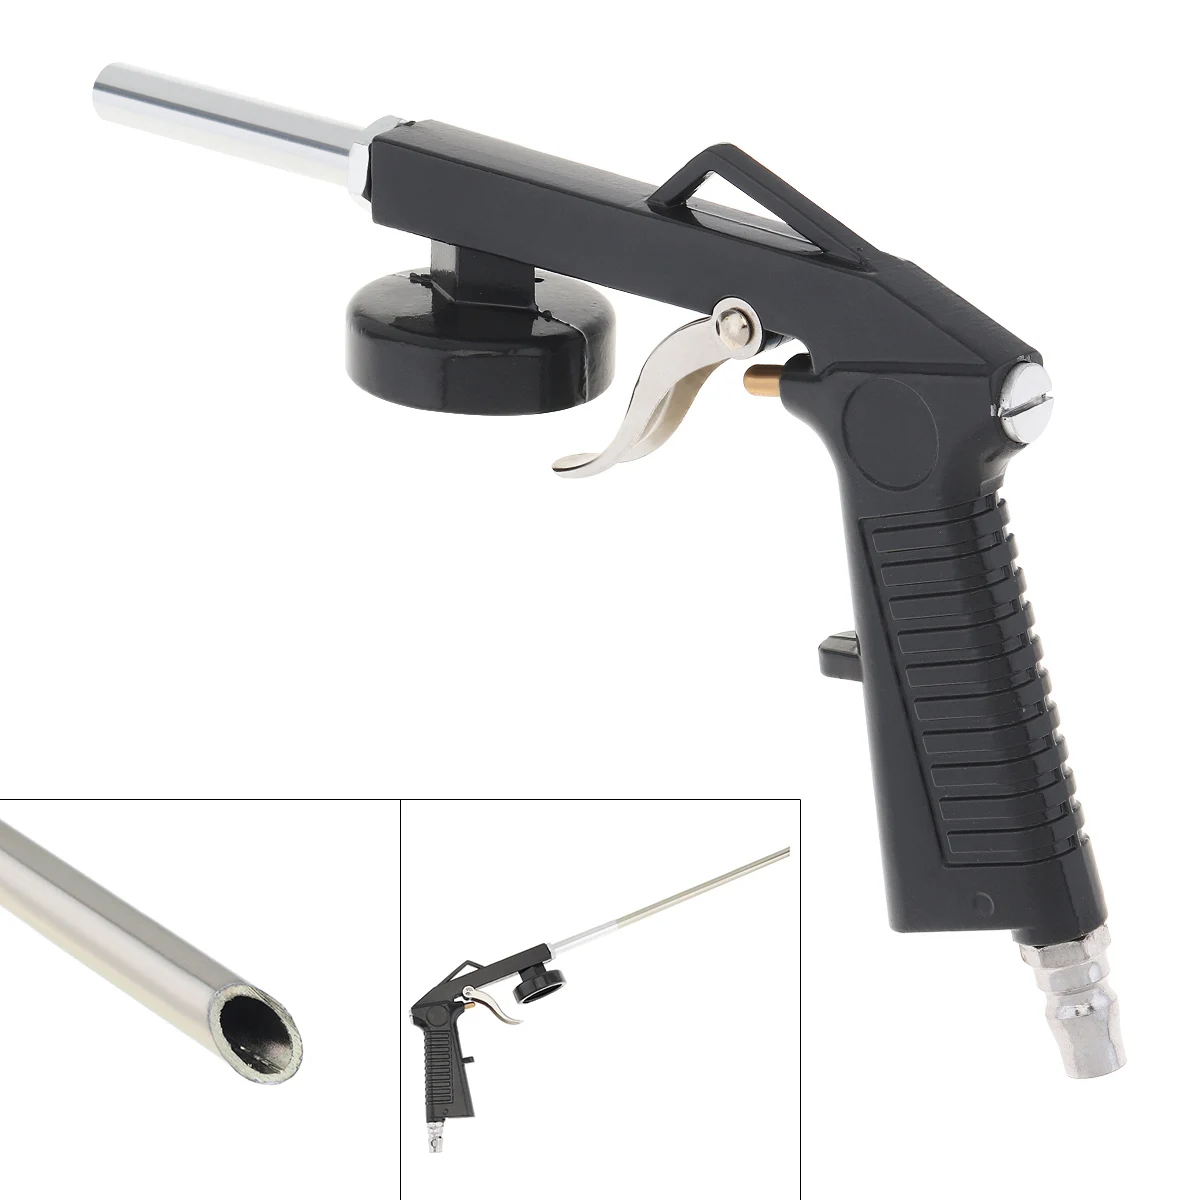 Universal Gray Car Chassis Special Pneumatic Spray Gun Varnish Air Pipe 7.5mm Air Inlet Port for Automotive Chassis Spray toro universal gray car pneumatic spray gun chassis armor special varnish air pipe nozzle tool for automotive chassis spraying